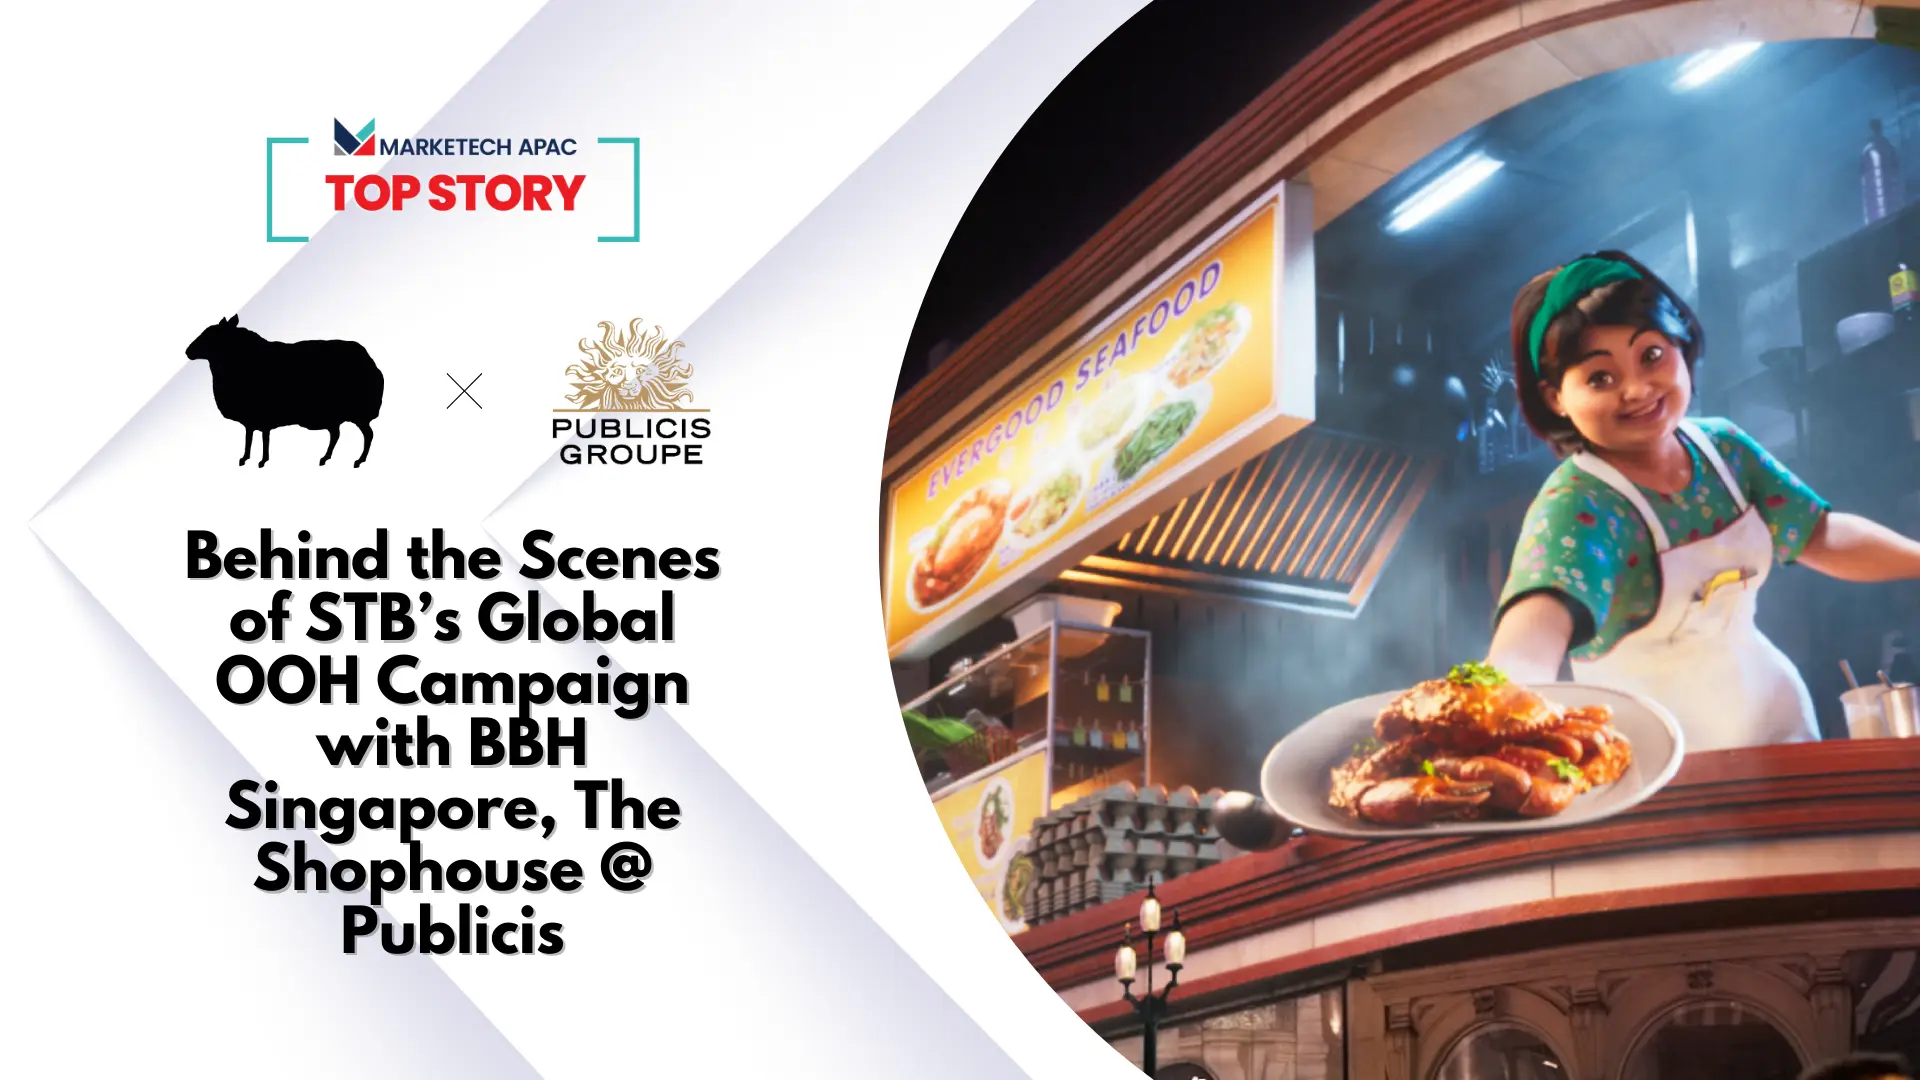 Top Story: Behind the scenes of STB’s global OOH campaign with BBH Singapore, The Shophouse @ Publicis